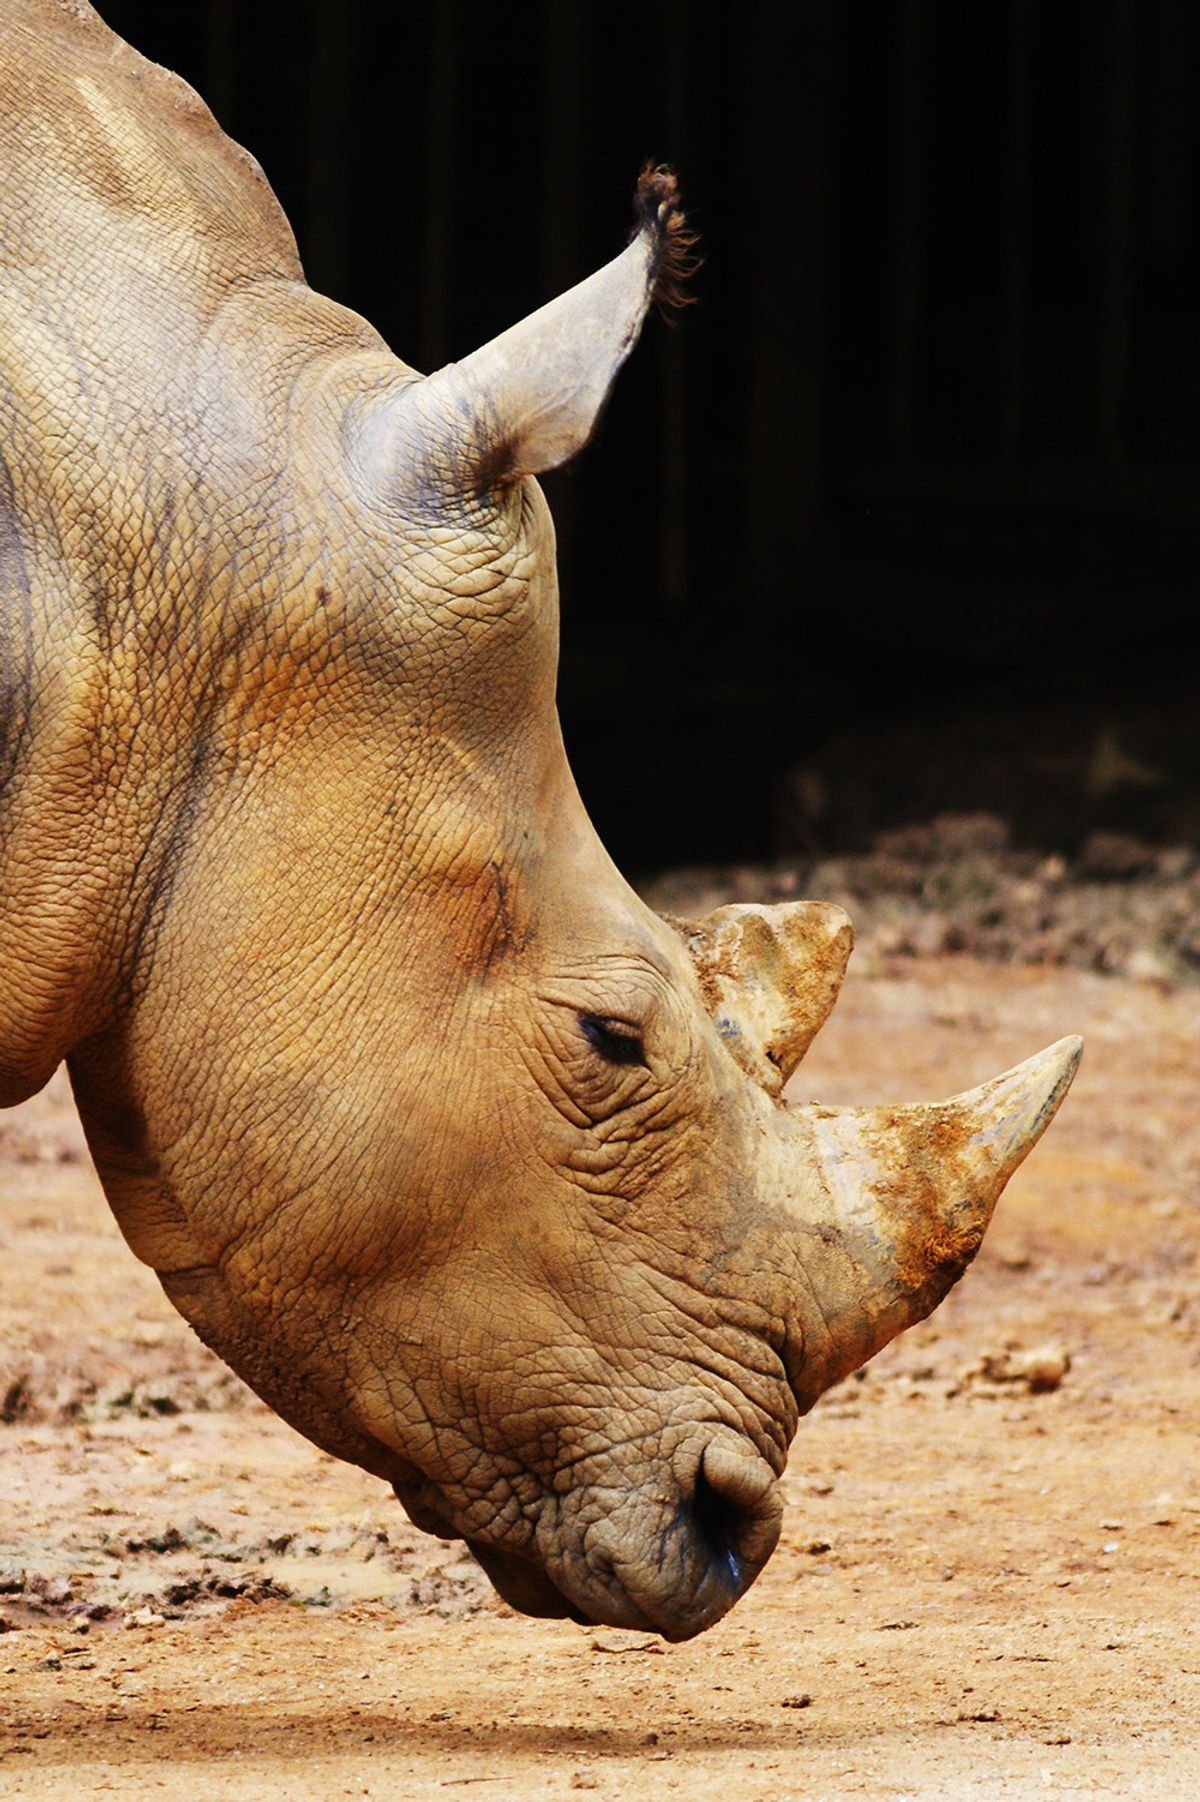 Because the Sumatran rhinoceros’s (<em >Dicerorhinus sumatrensis</em>) primary horn is embedded within its face, poachers kill the animals to extract the entire bone to sell in illegal wildlife trading markets.